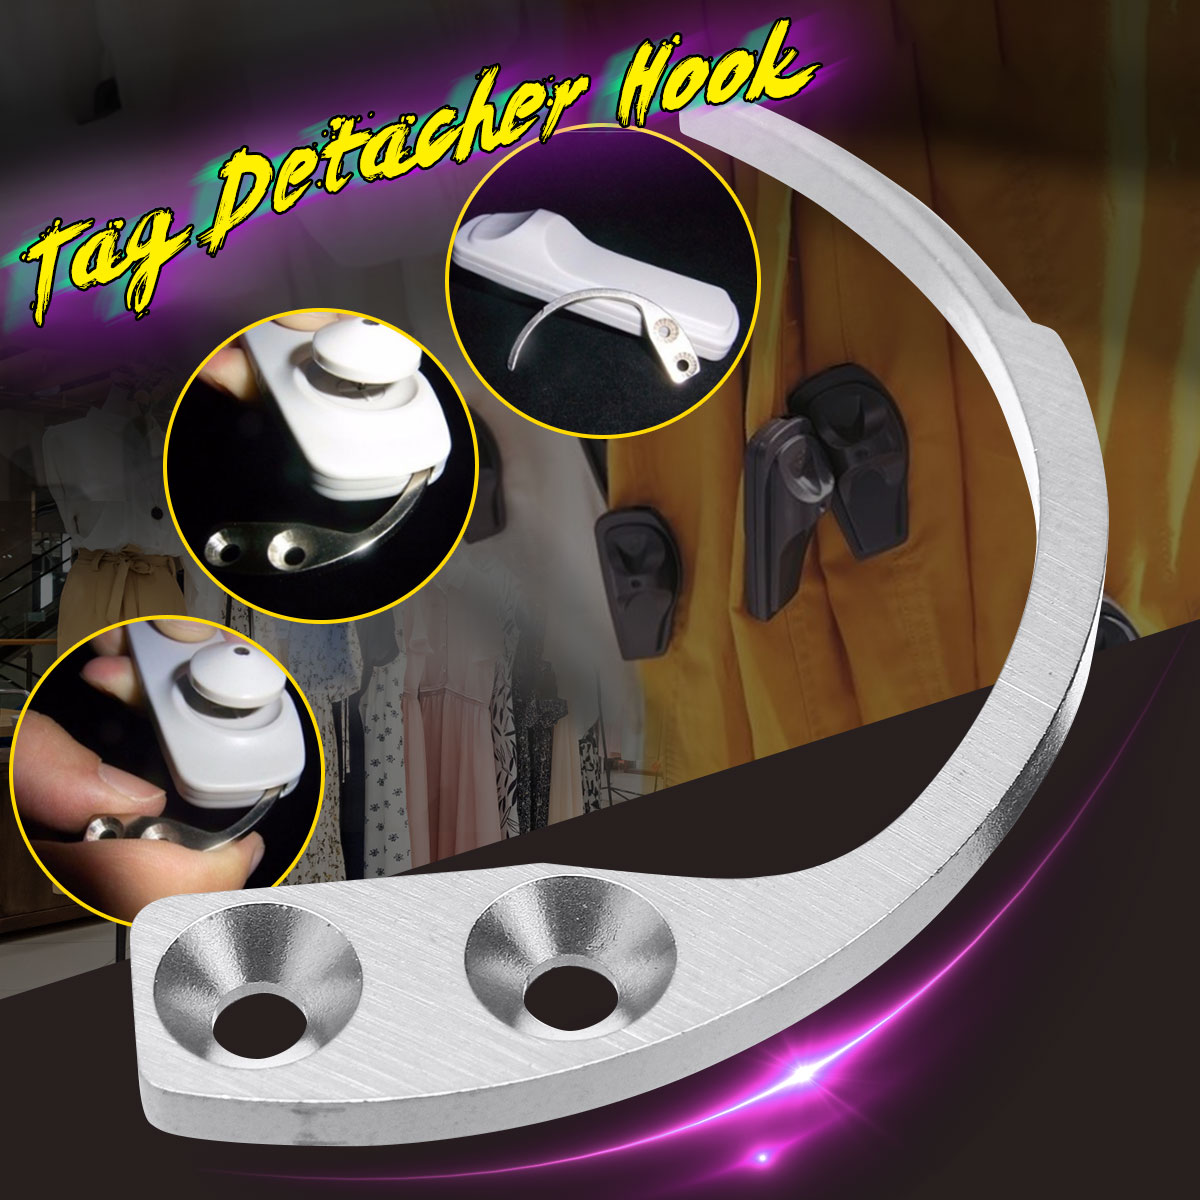 Tag-Detacher-Hook-Security-EAS-Remover-Key-Hard-Handheld-Effetool-Used-Pin-Open-1643732